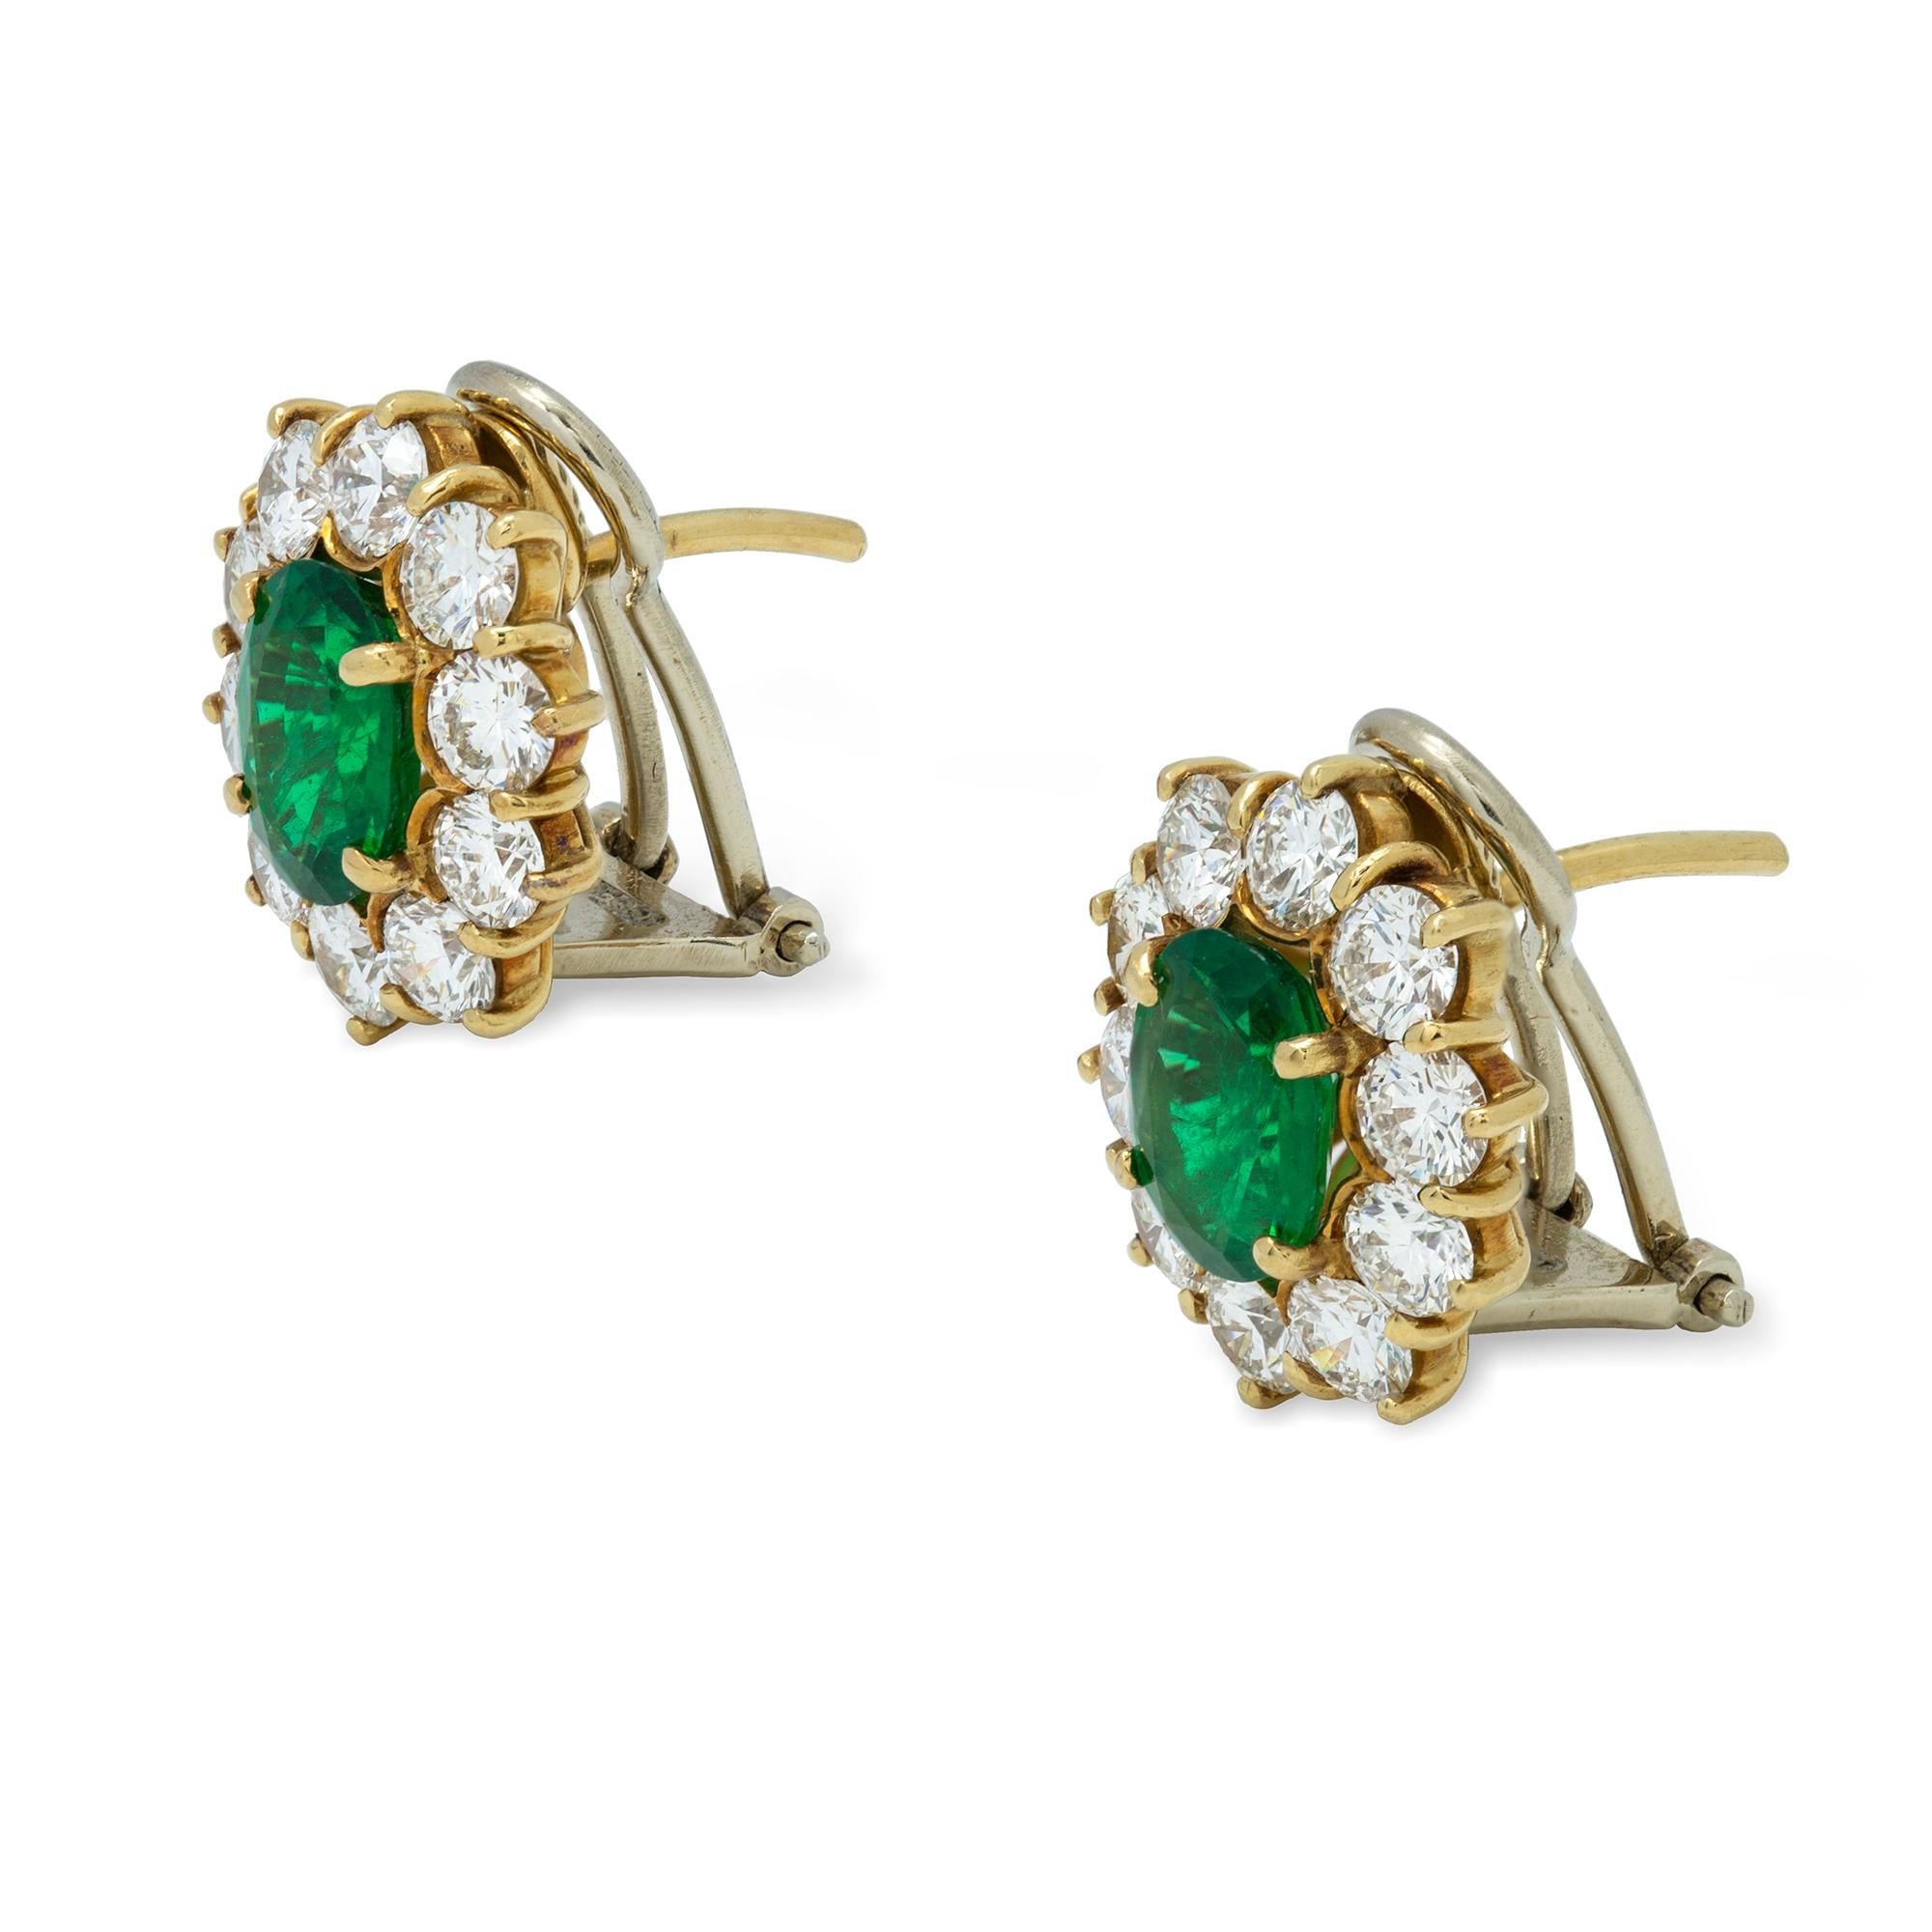 A pair of emerald and diamond cluster earrings, each earring centrally set with an oval faceted emerald, surrounded by ten round brilliant-cut diamonds, the emeralds estimated to weigh approximately a total of 1.85 carats and the diamonds